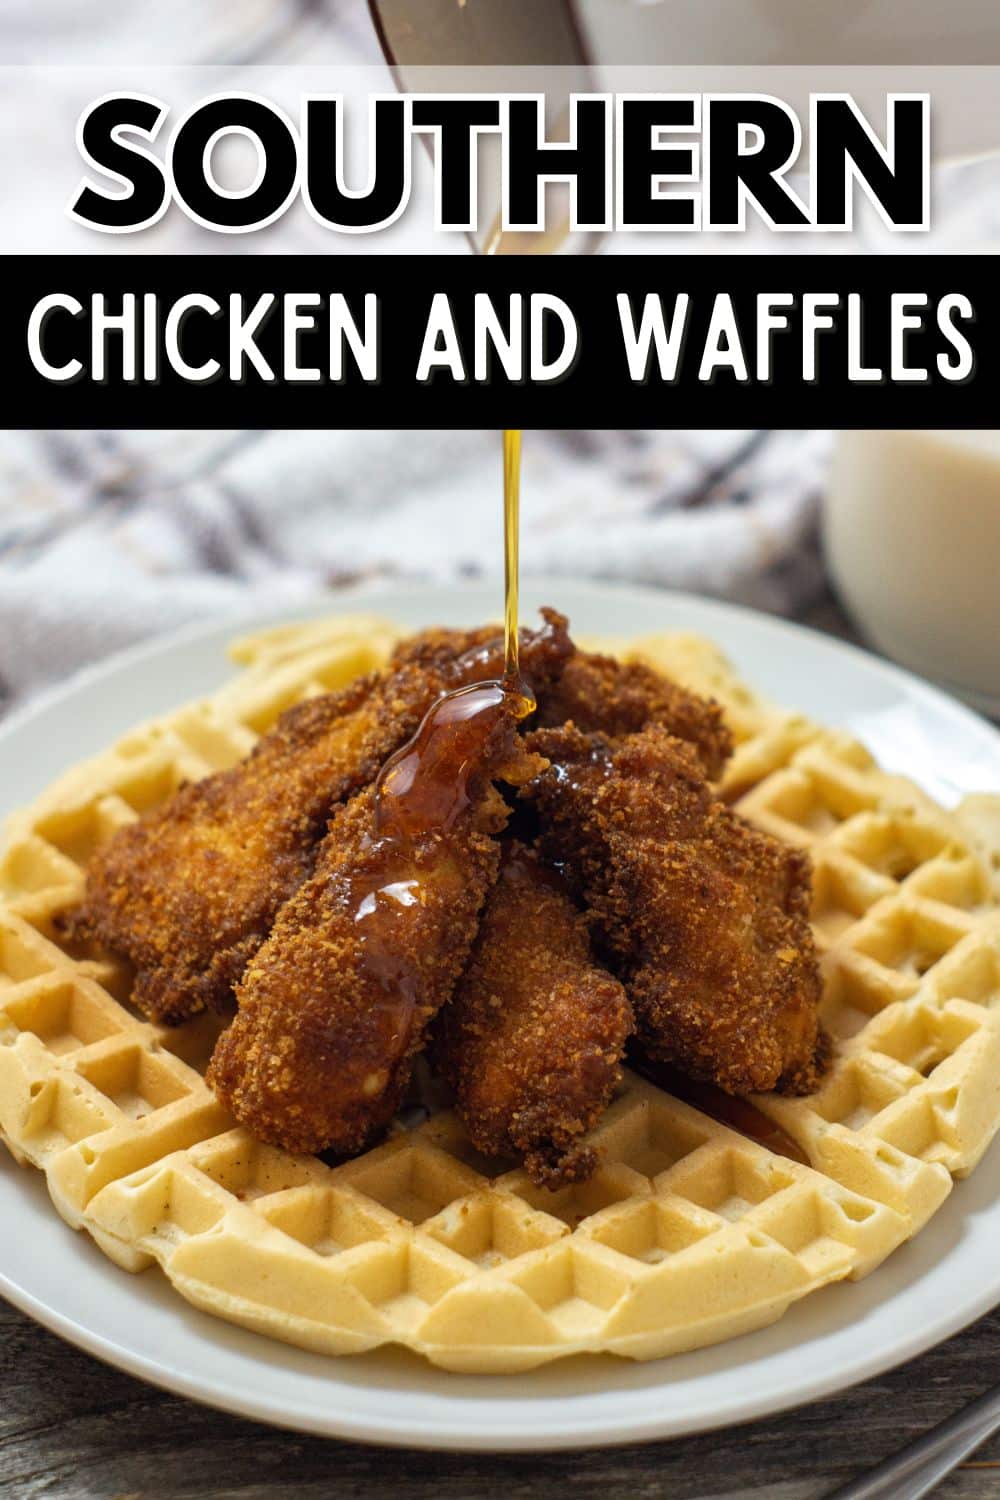 Southern chicken and waffles: A delicious combination of crispy fried chicken and fluffy waffles, originating from the Southern region. This classic dish combines savory and sweet flavors in perfect harmony, making it a popular